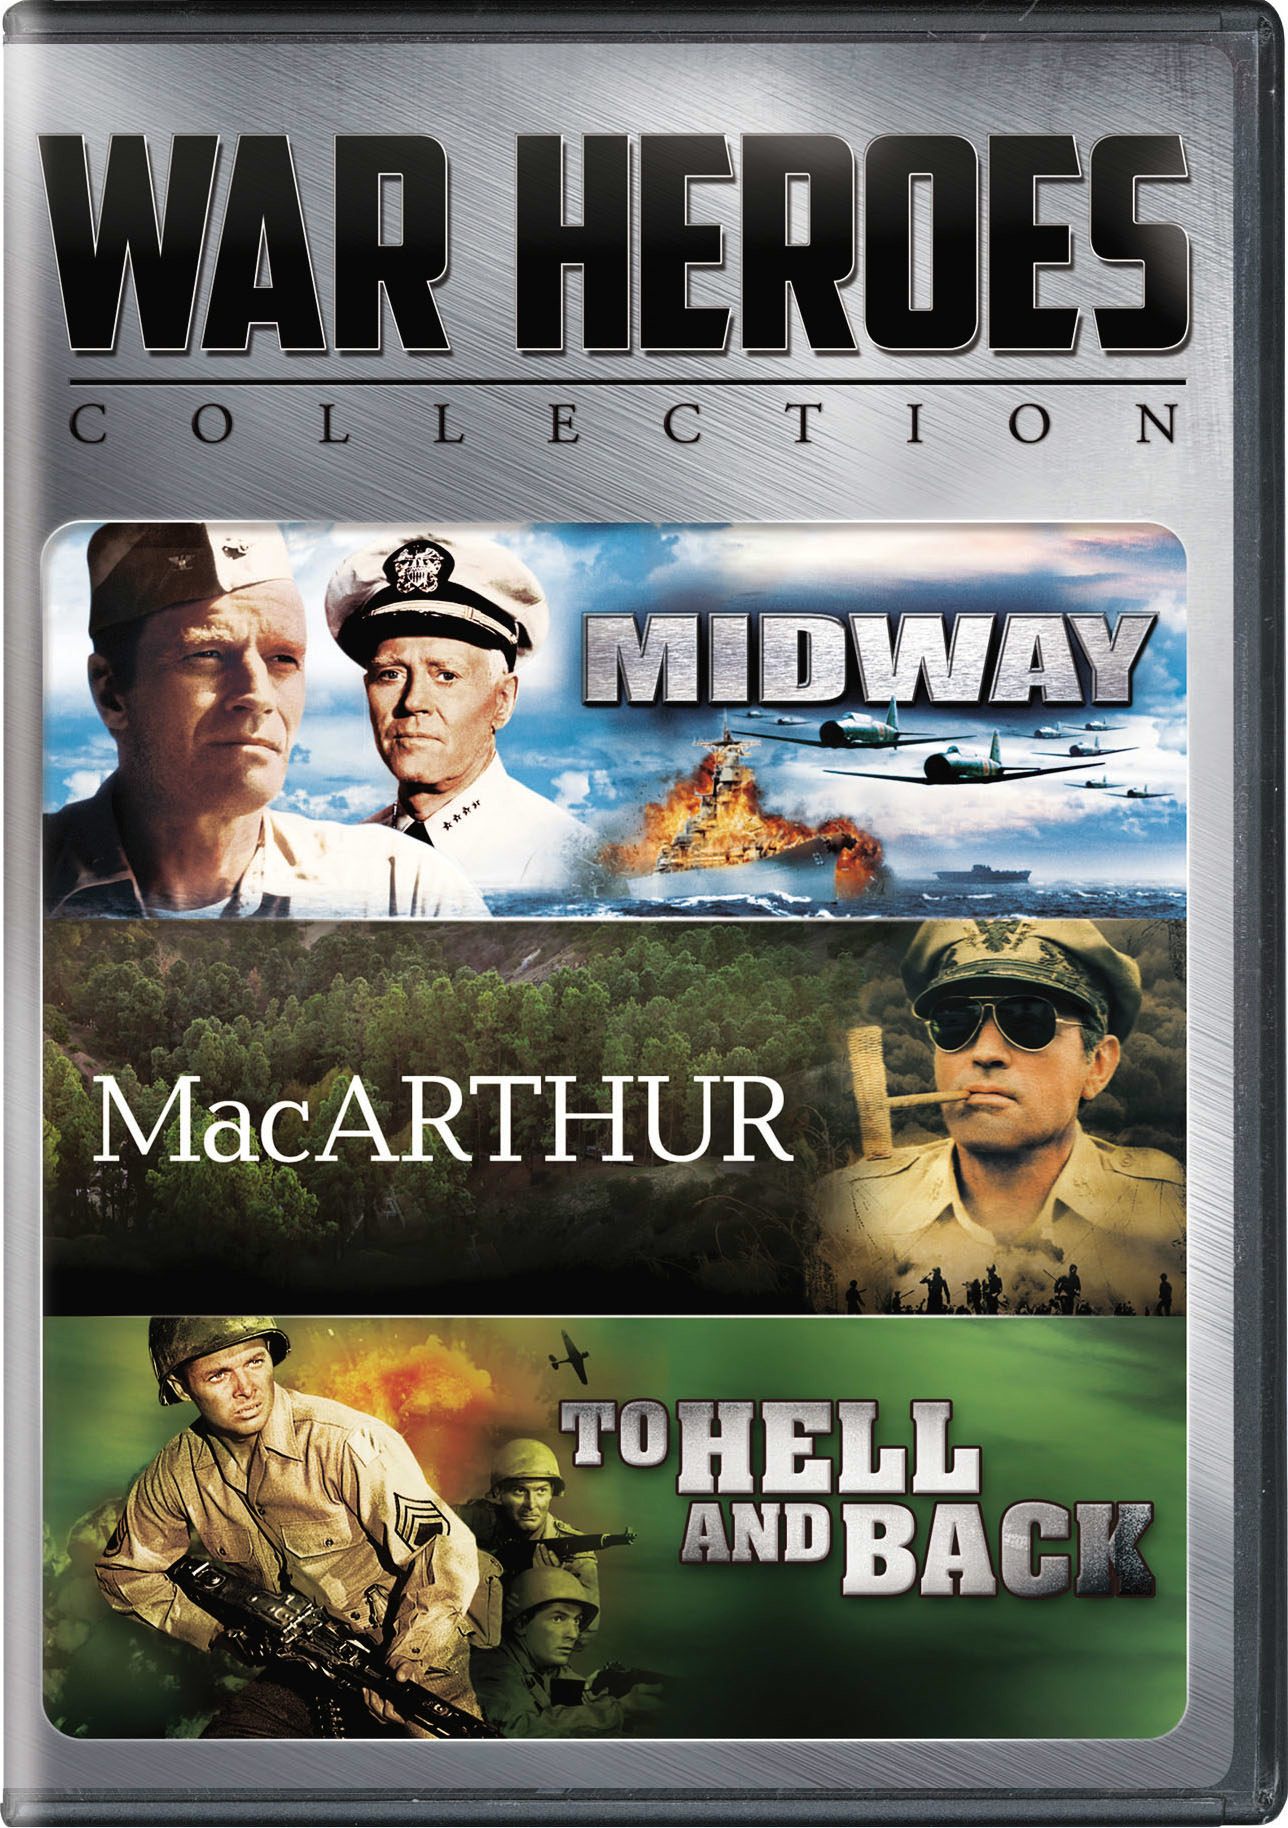 Midway/MacArthur/To Hell And Back (DVD Set) - DVD [ 1976 ]  - War Movies On DVD - Movies On GRUV